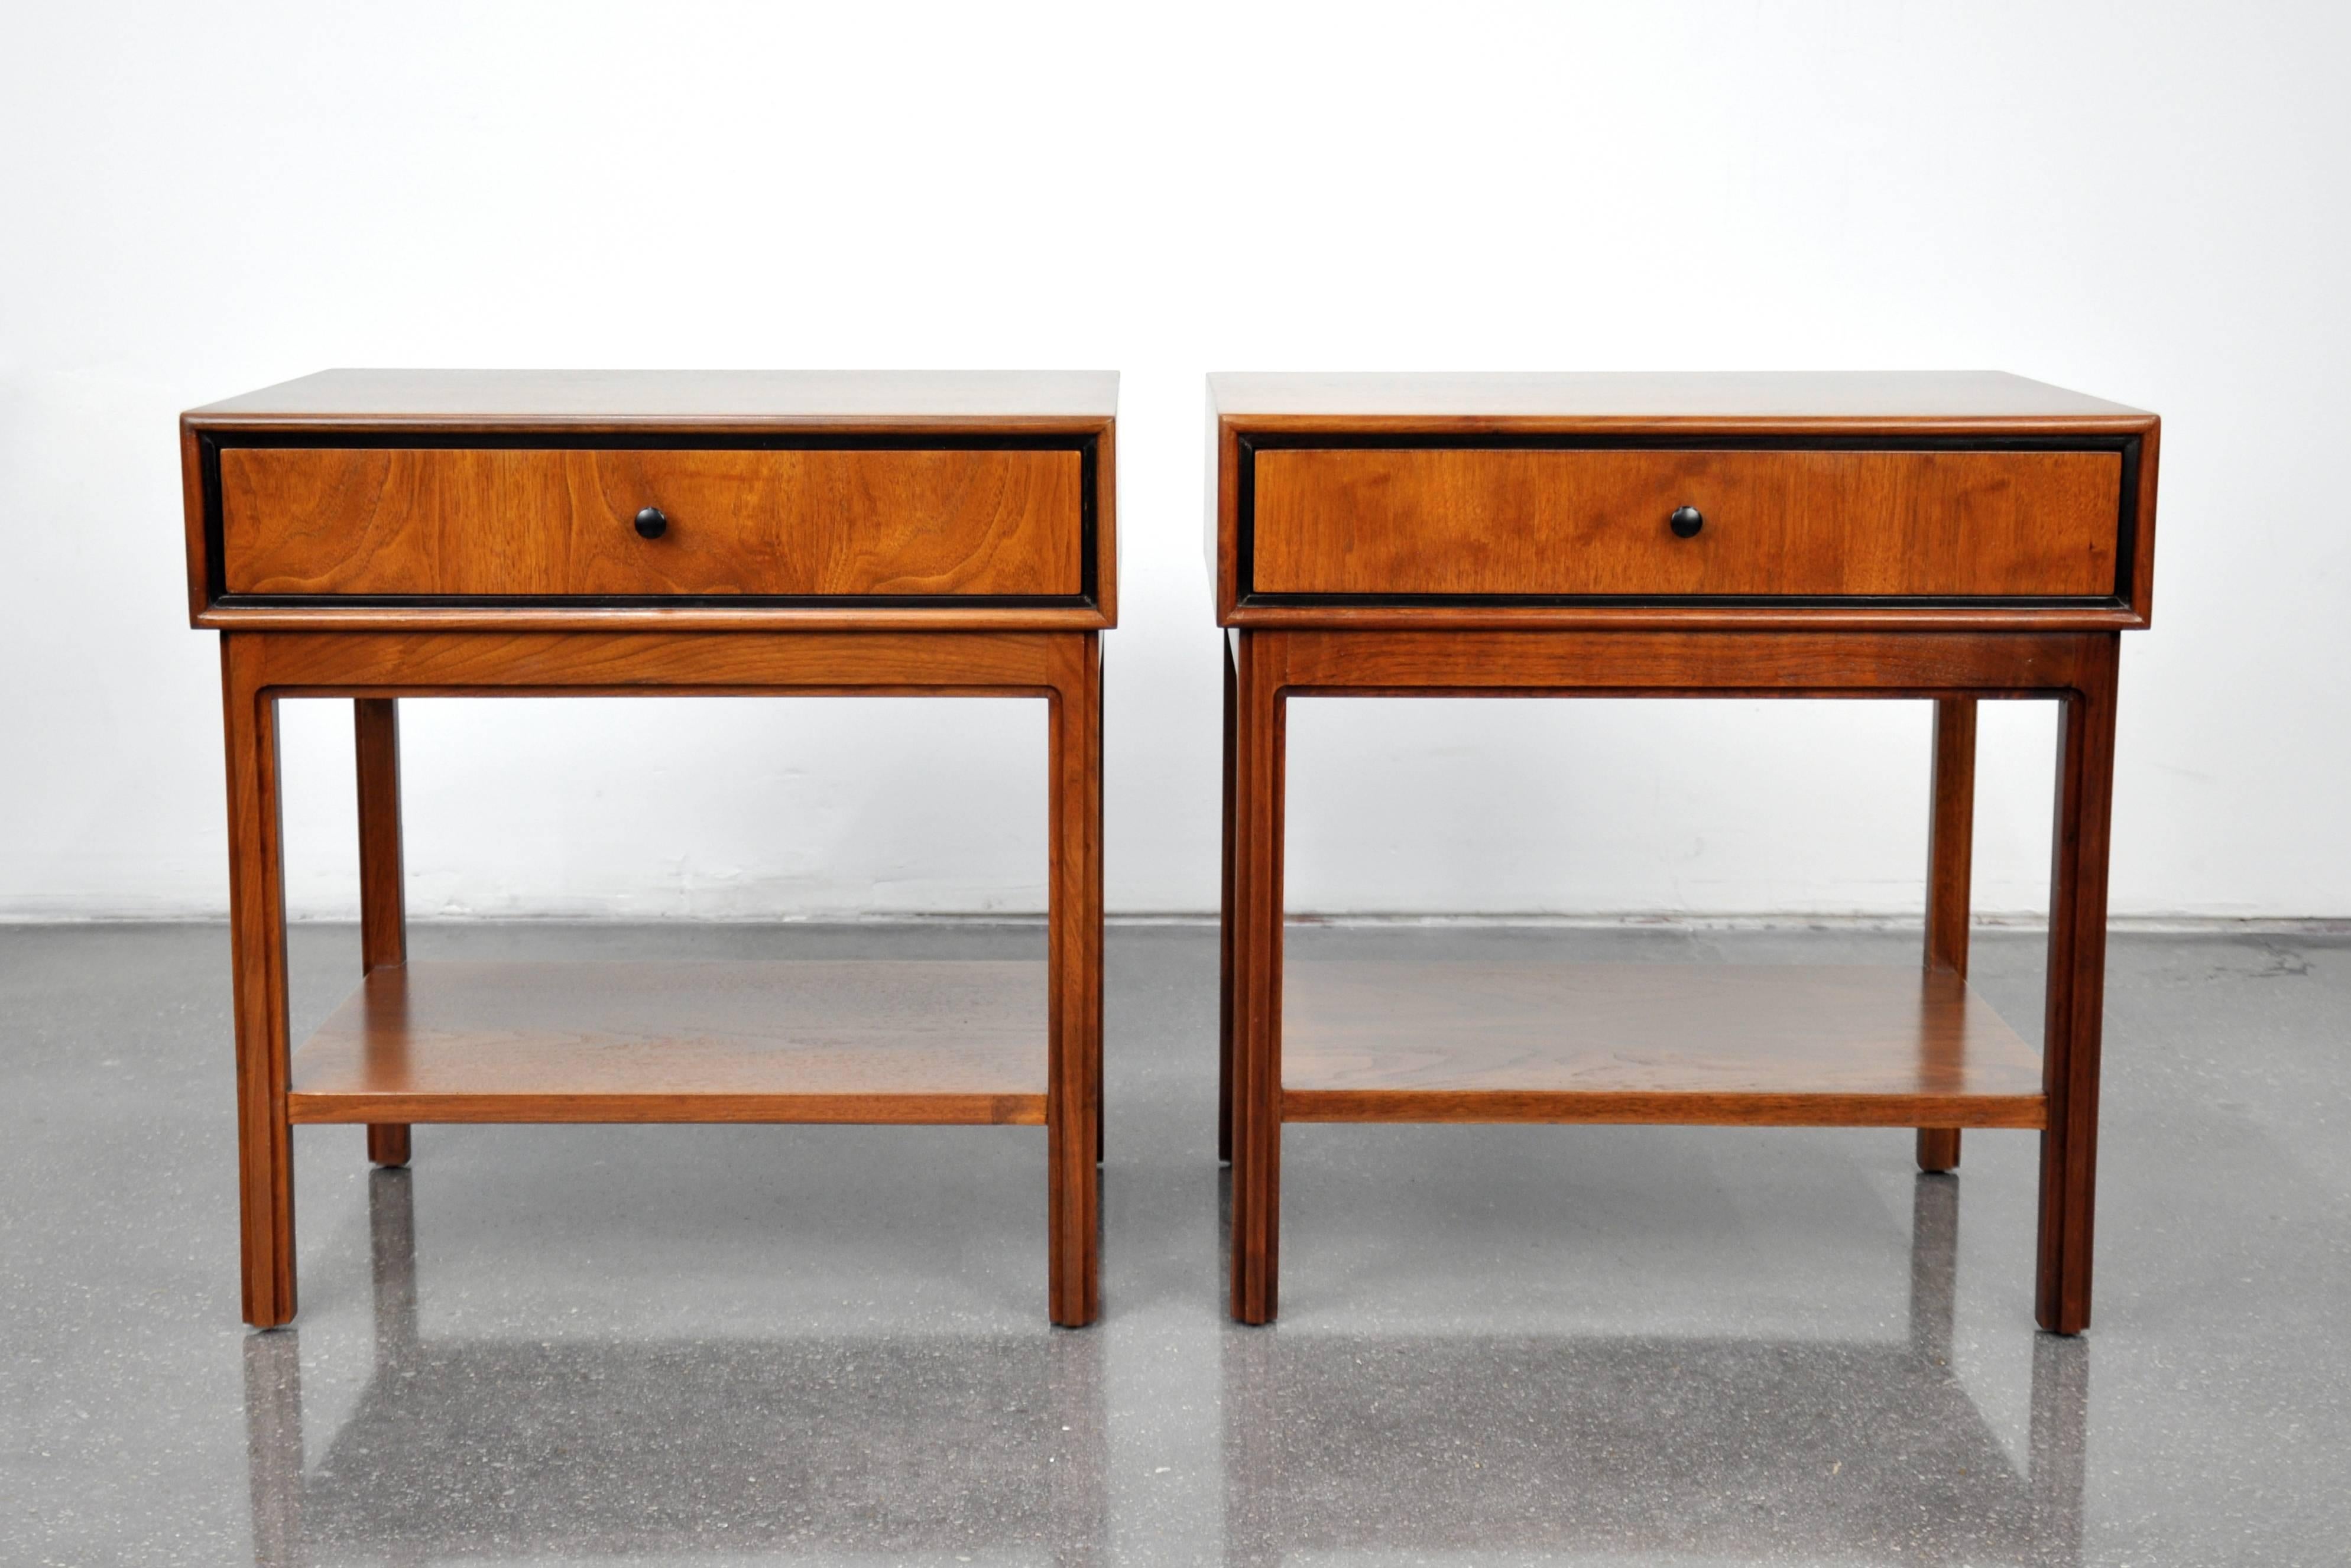 Early and rare Mid-Century Modern vintage pair of side, end, occasional or bedside tables designed by Milo Baughman for Arch Gordon in the 1950s. Professionally refinished, the beautifully grained walnut creates striking patterns. The drawer fronts